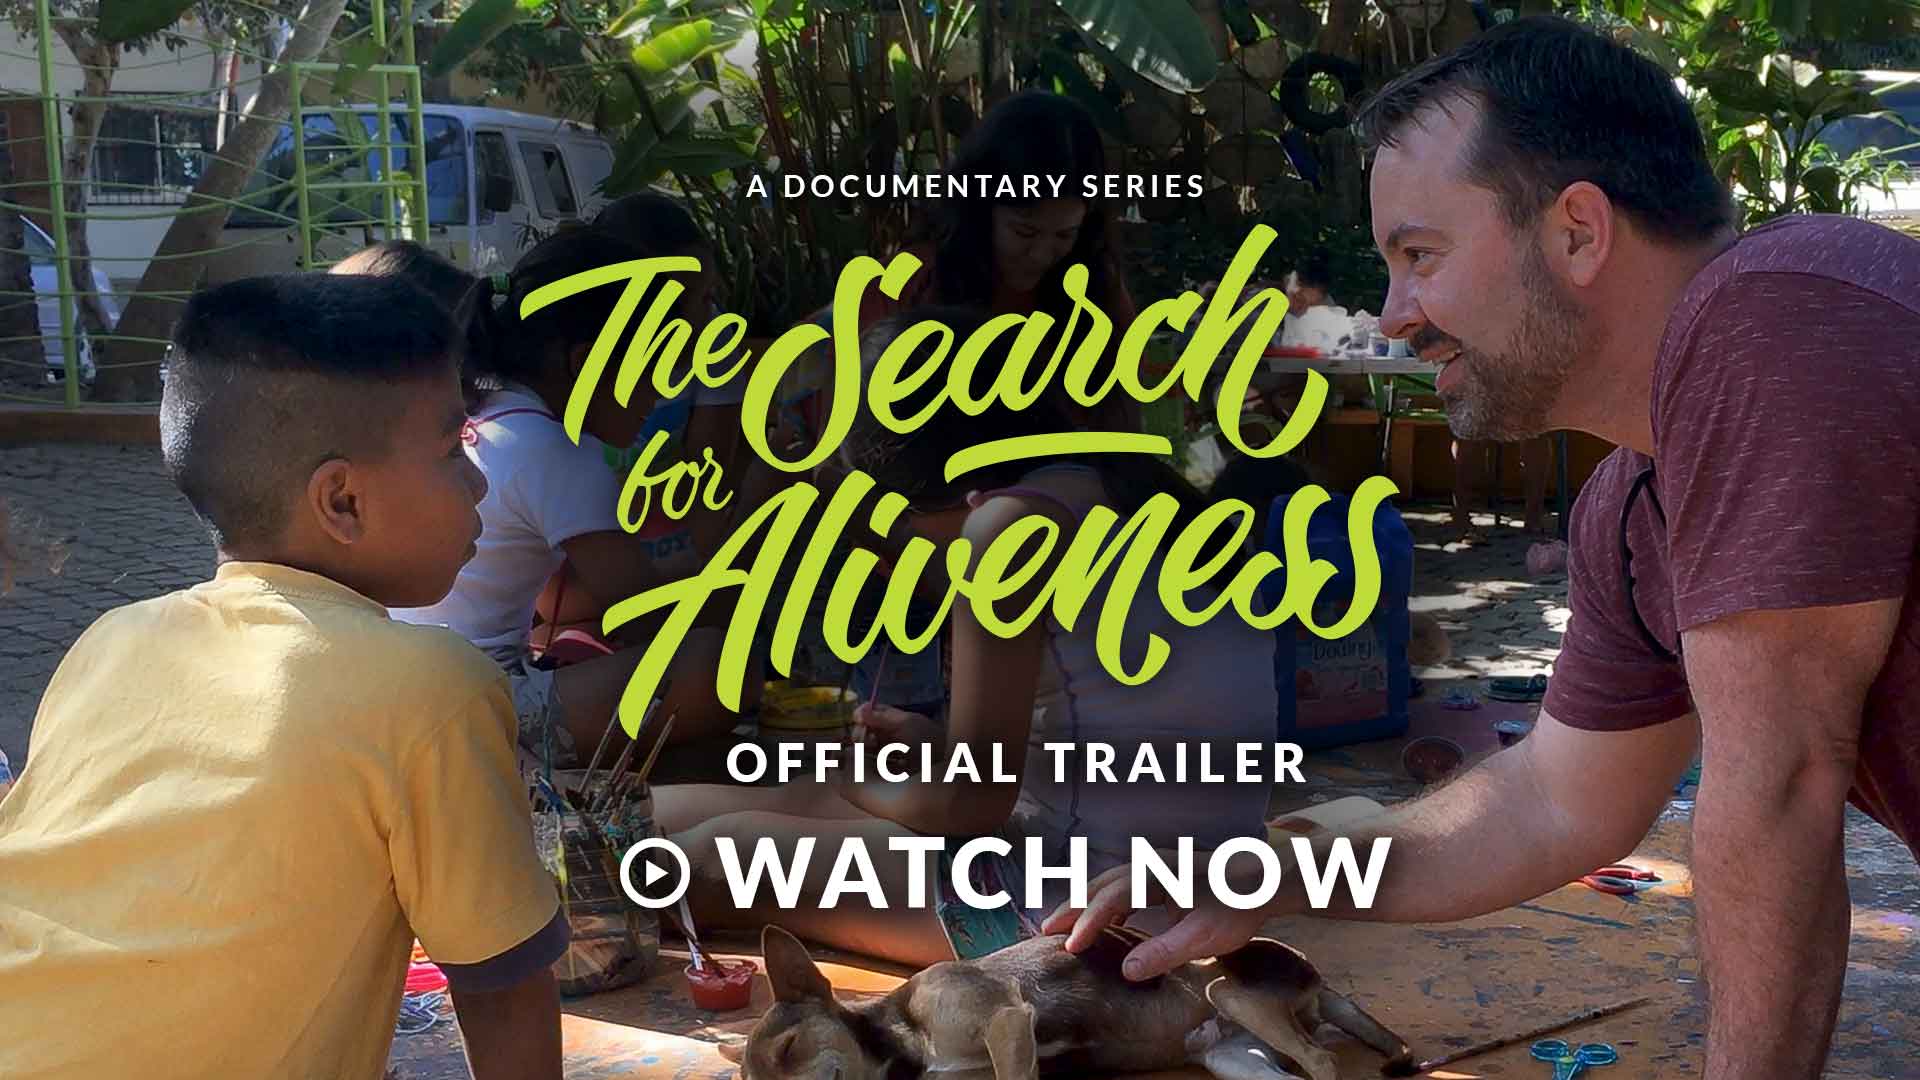 Documentary: The Search for Aliveness